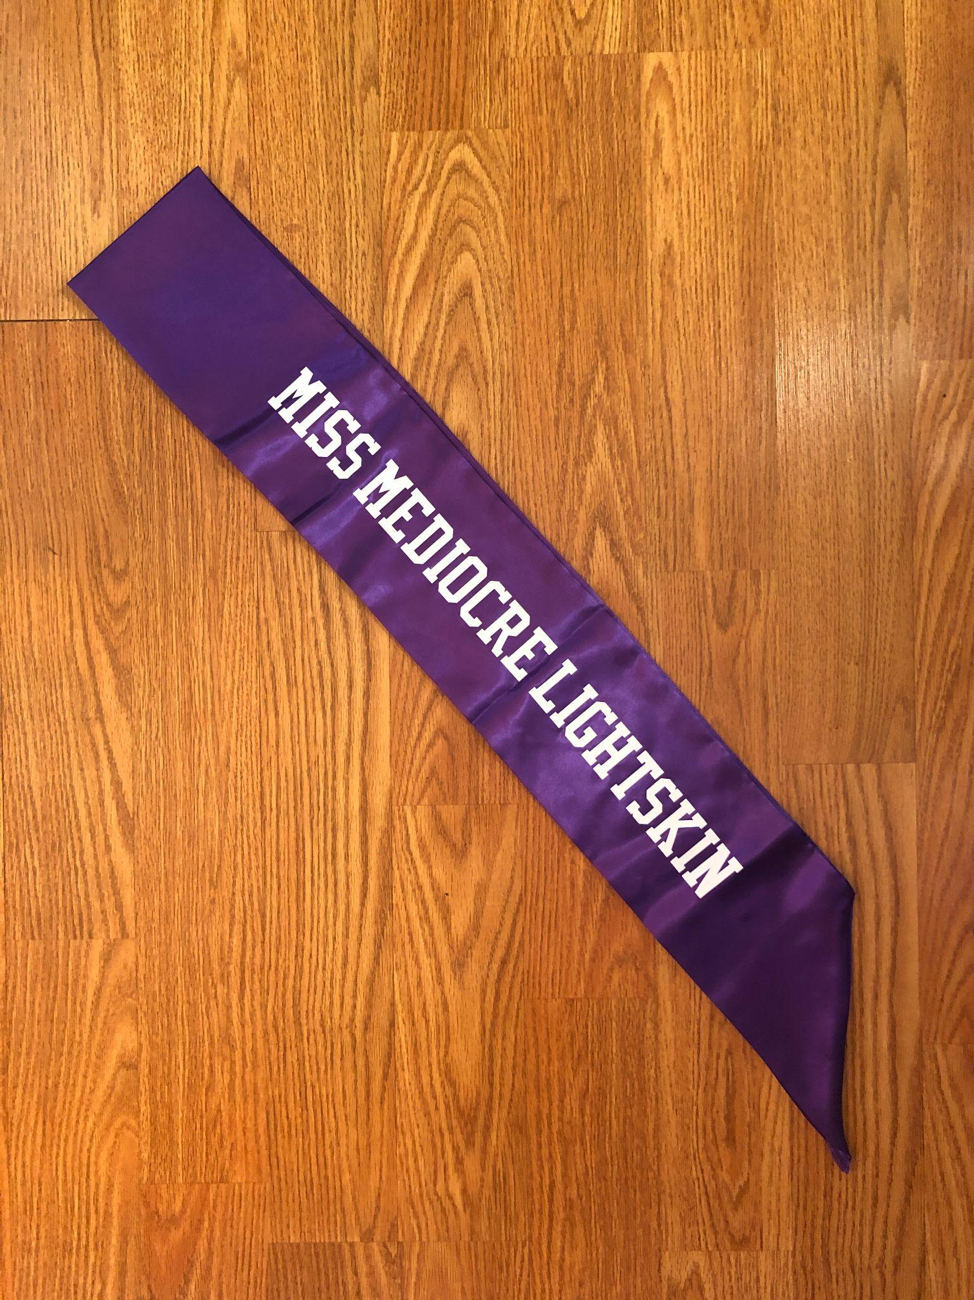  Pageant sash with text  This piece, part of an ongoing series of pageant sashes, explores troupes within the Black community that align with lighter skinned and multi-racial identities. It also explores my relationship to my own complex background, 